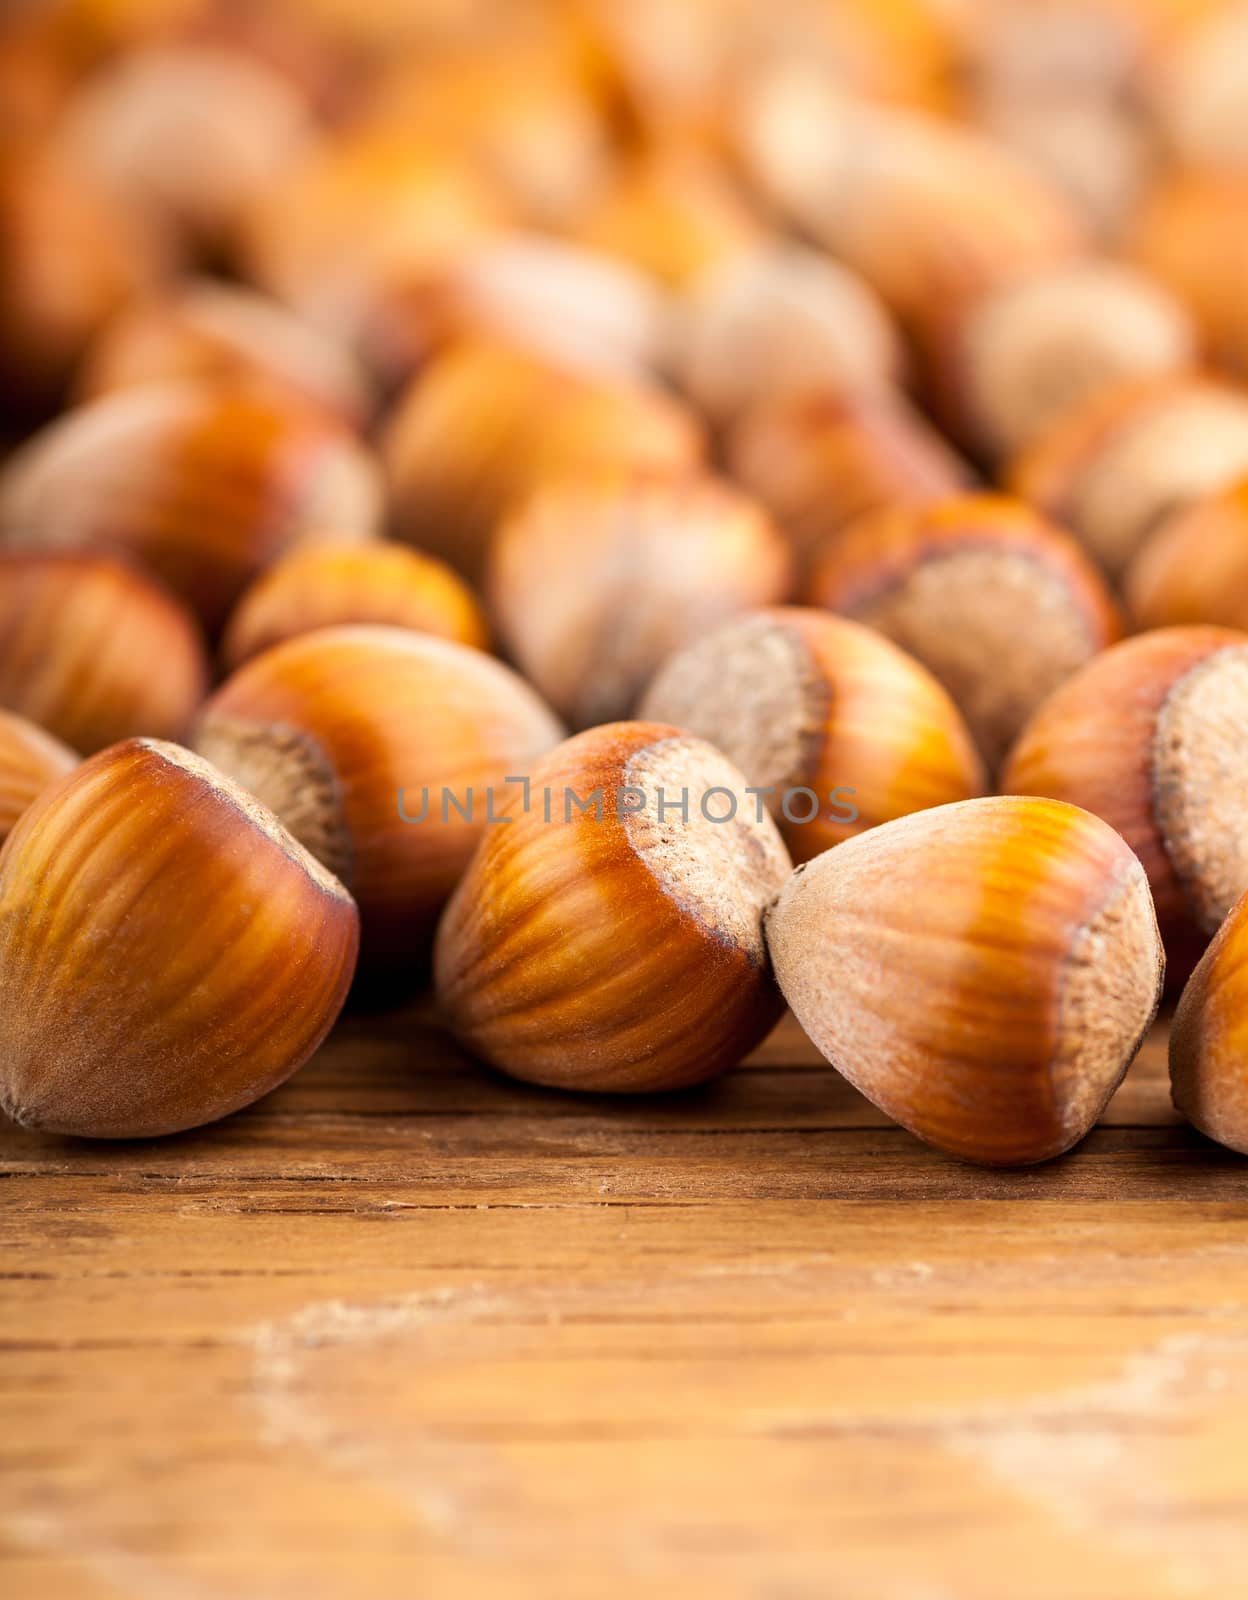 Dried whole tree nuts close-up on wooden background